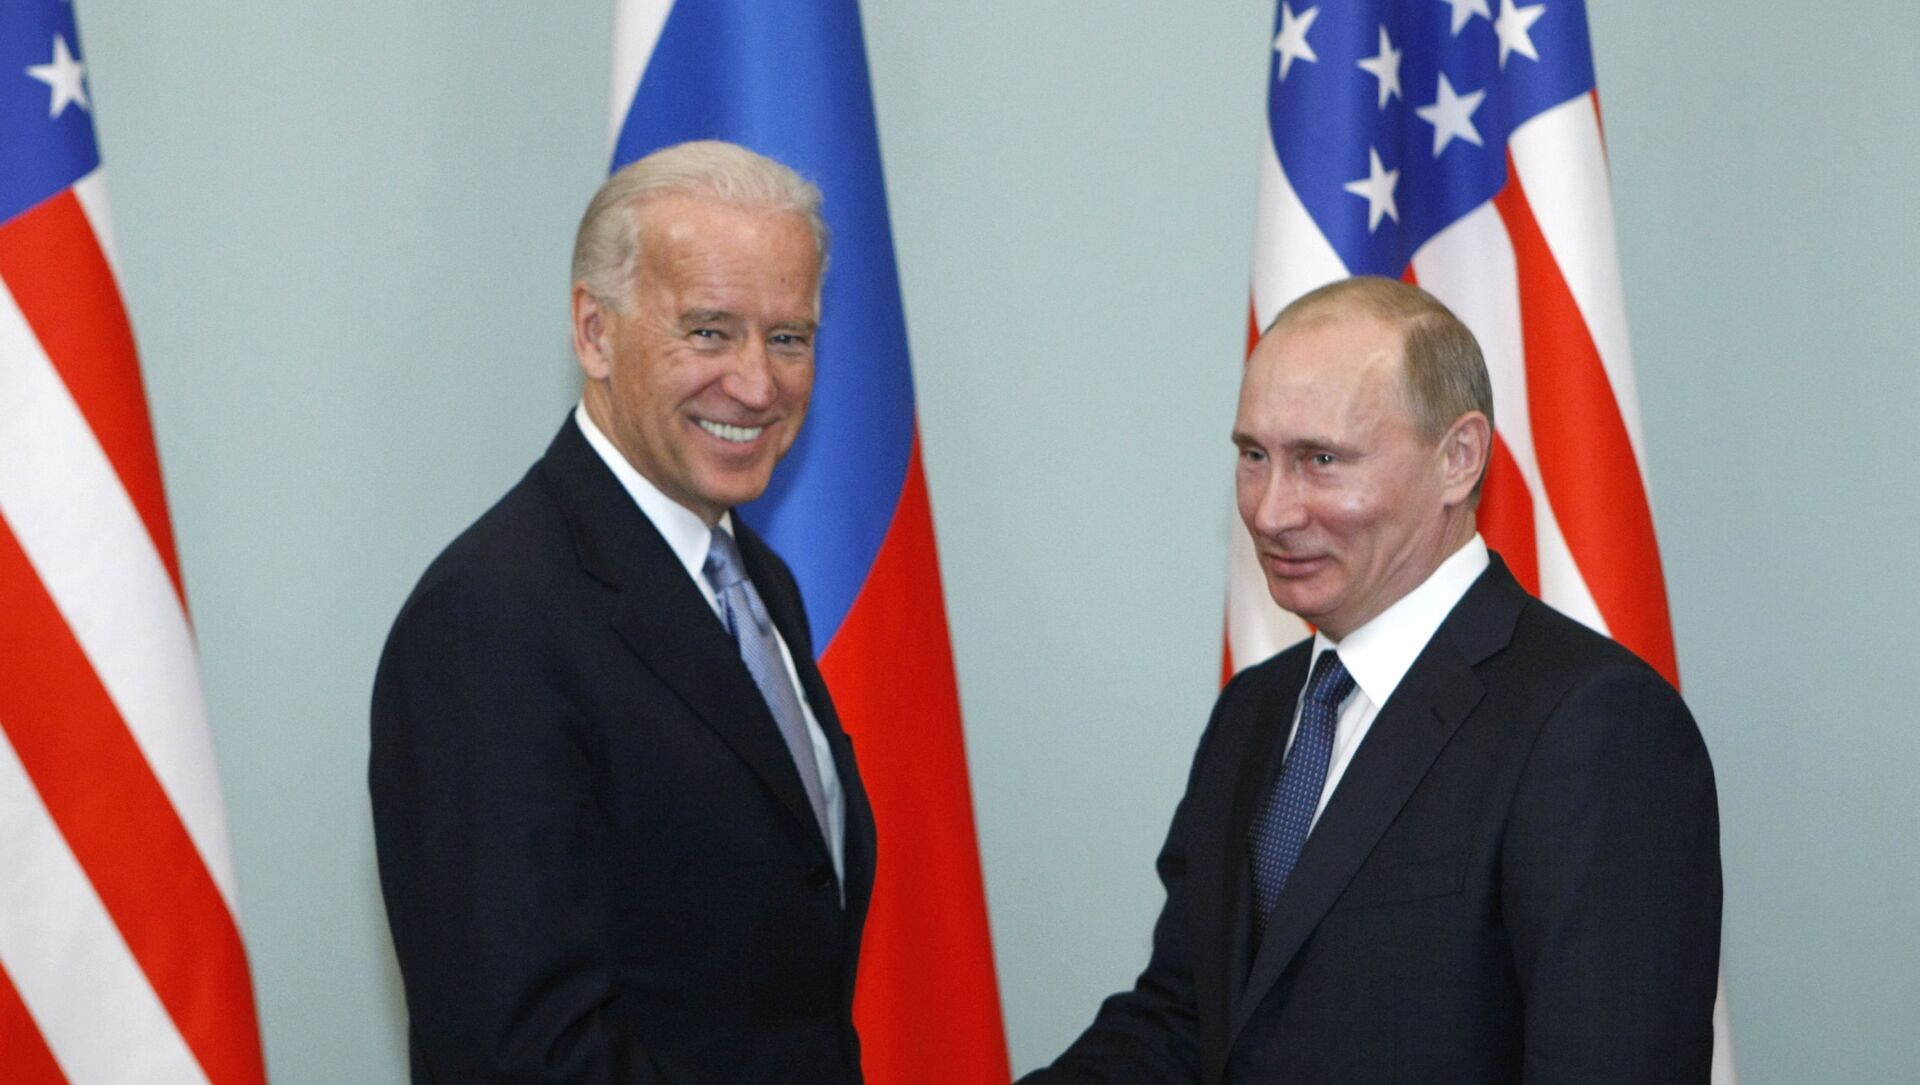 In this March 10, 2011, file photo, Vice President of the United States Joe Biden, left, shakes hands with Russian Prime Minister Vladimir Putin in Moscow, Russia. - Sputnik International, 1920, 04.06.2021